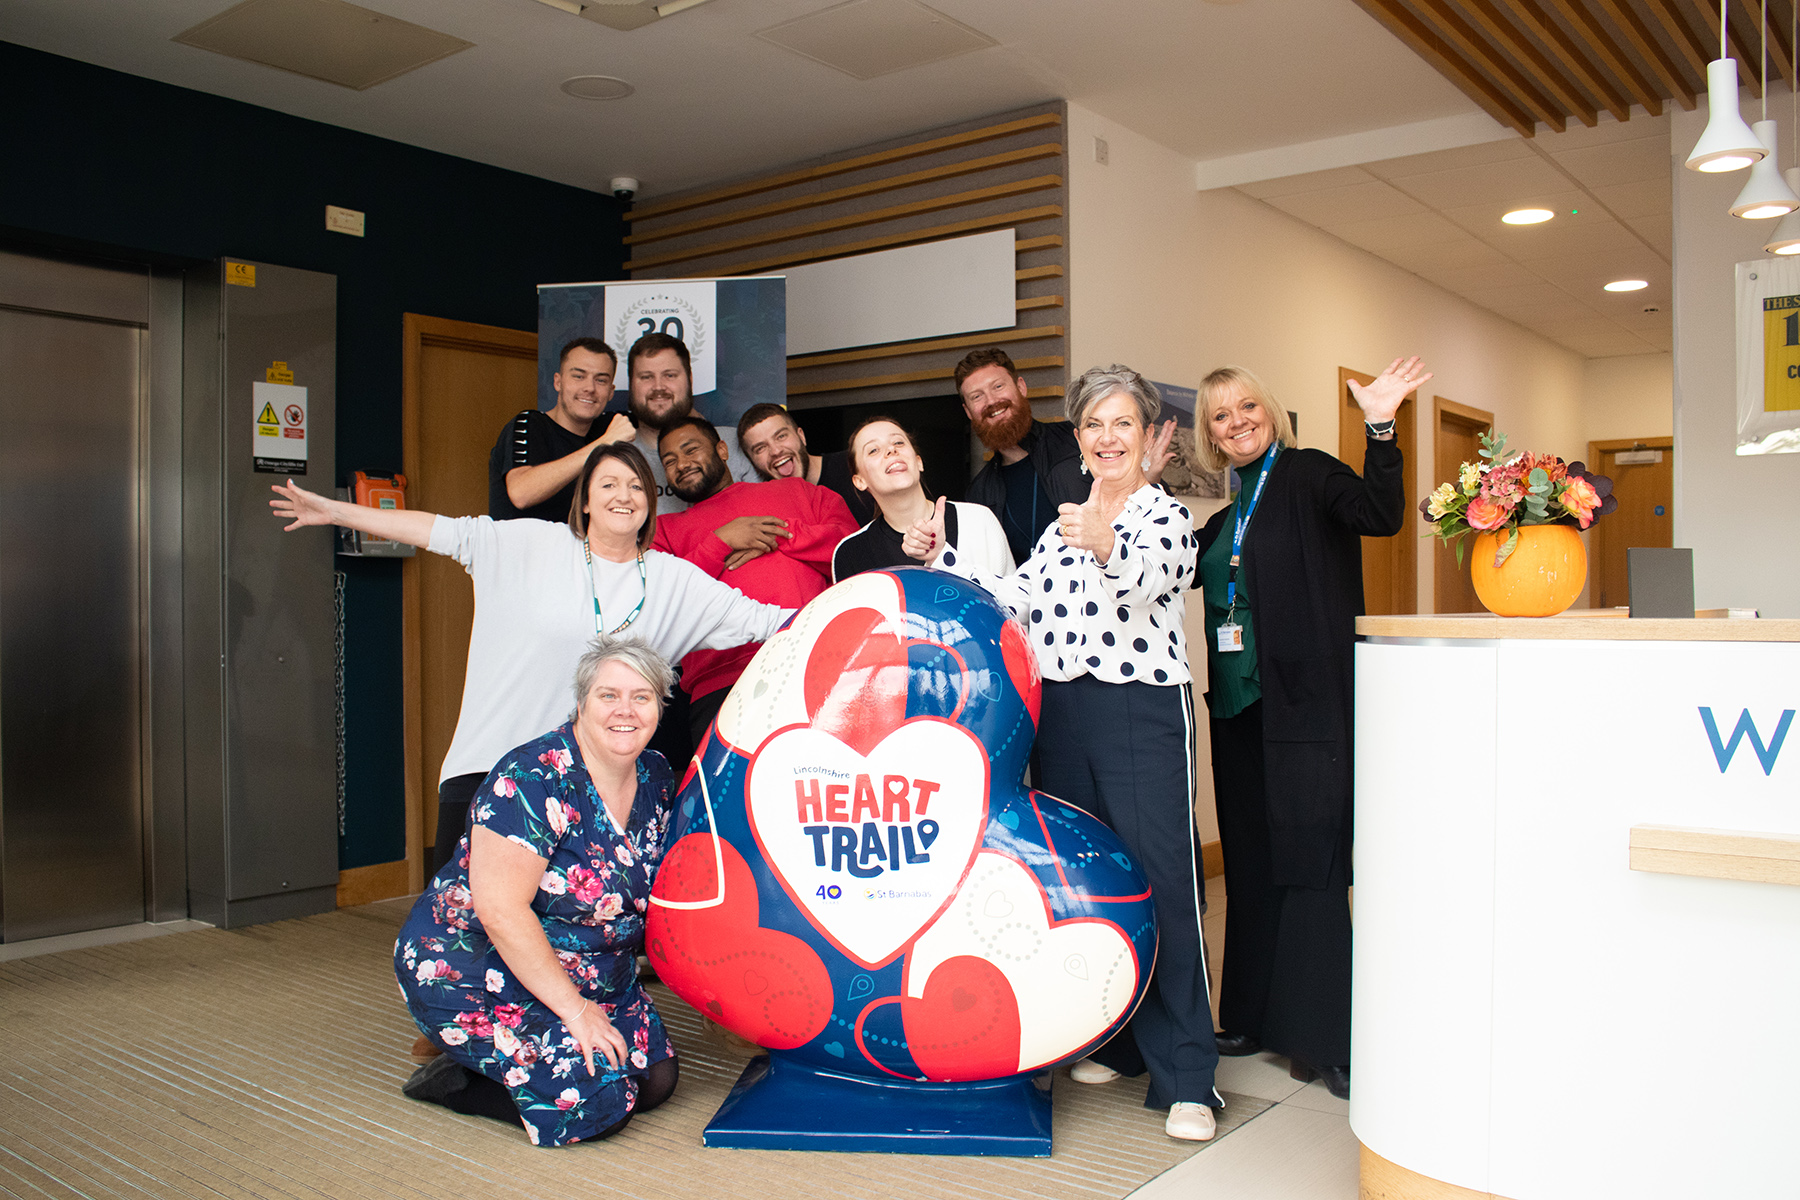 Group of people posing with a large heart sculpture painted blue, red and white with HeART Trail logo